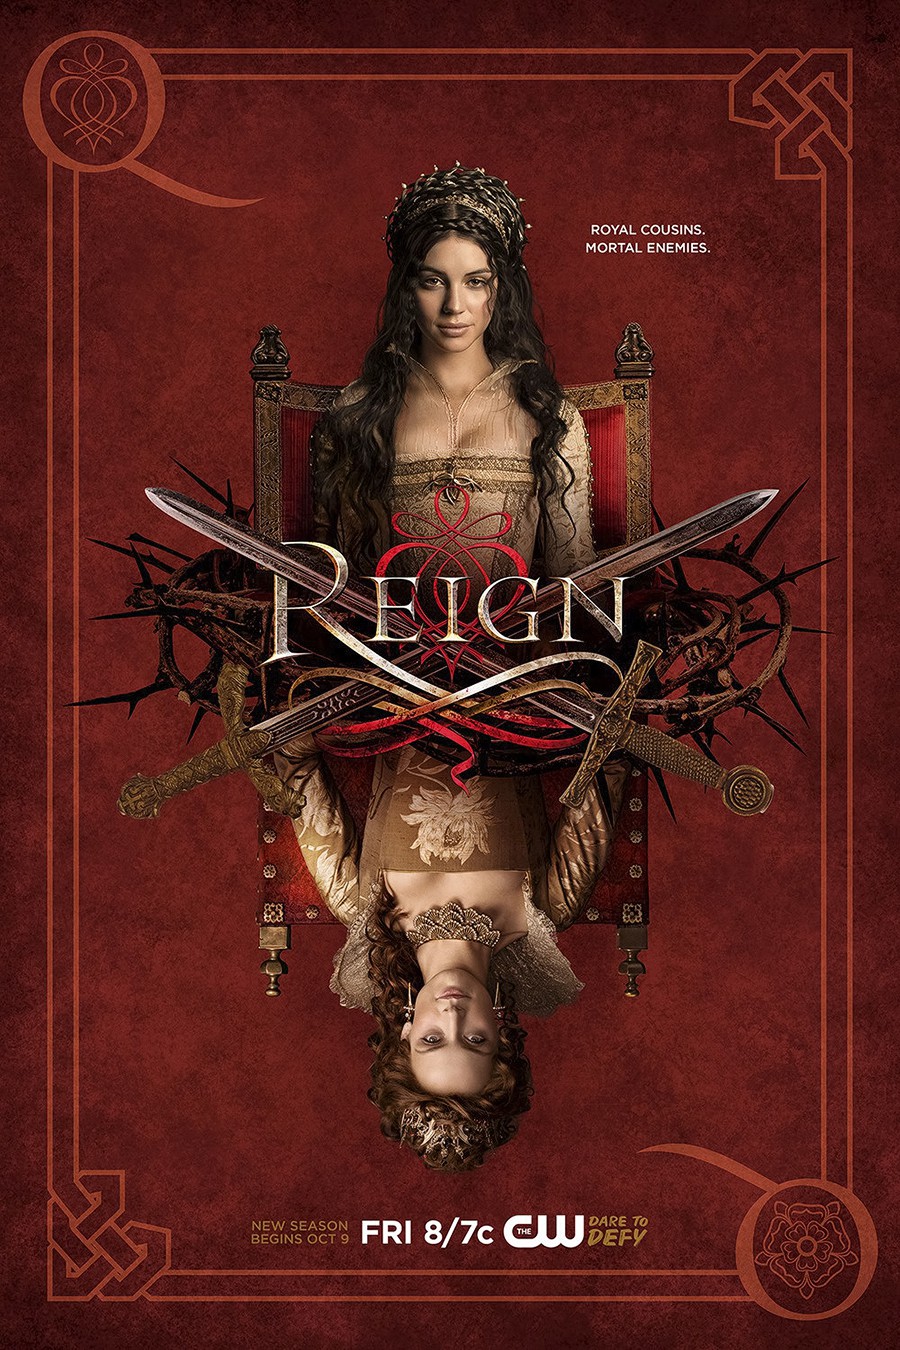 Extra Large TV Poster Image for Reign (#5 of 6)